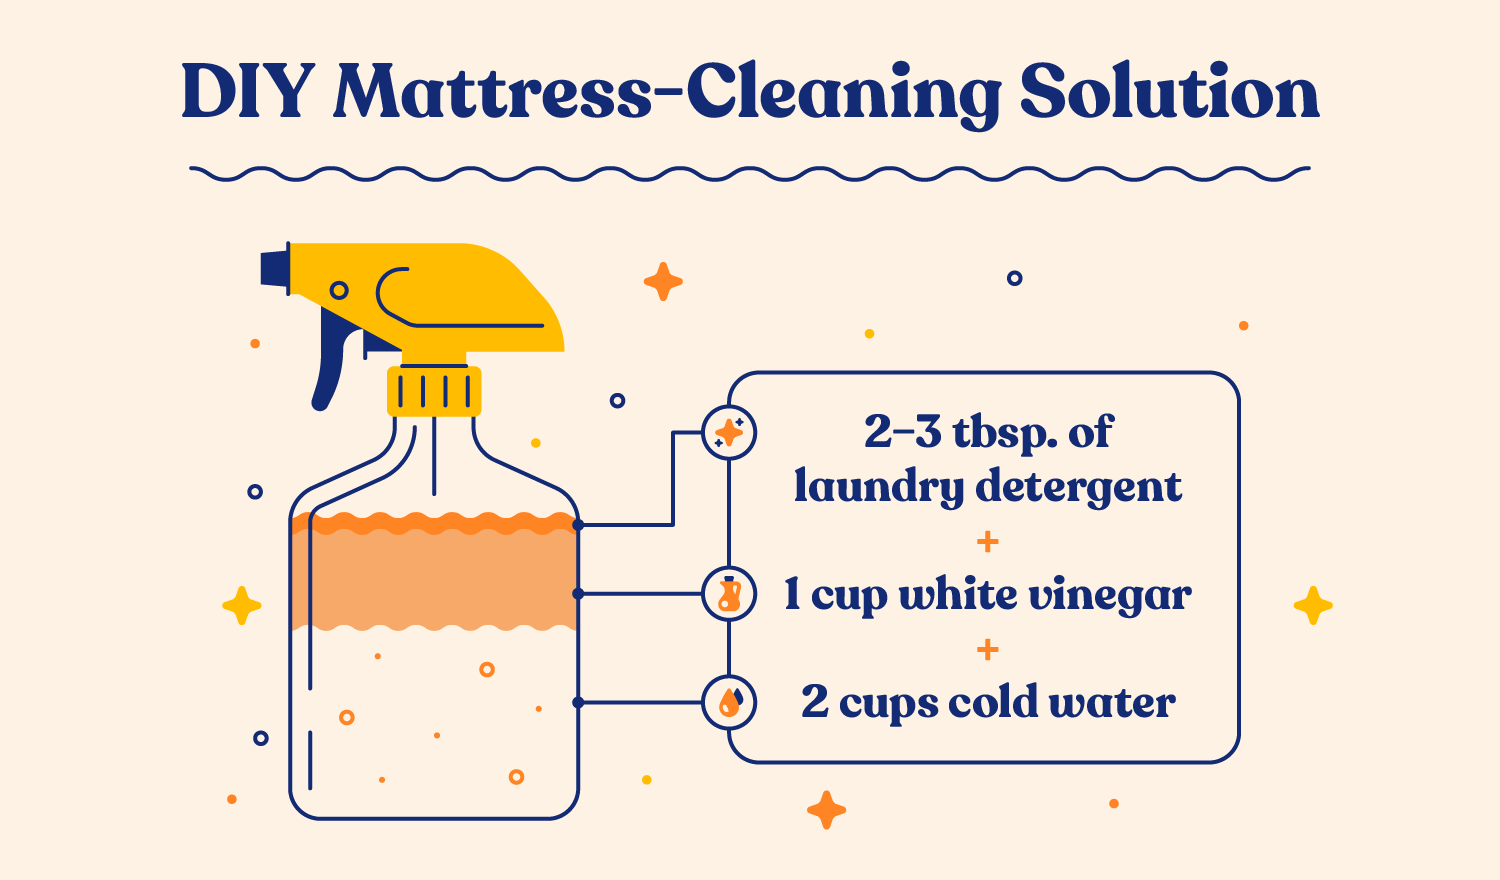 Steps For Cleaning A Mattress Without A Vacuum